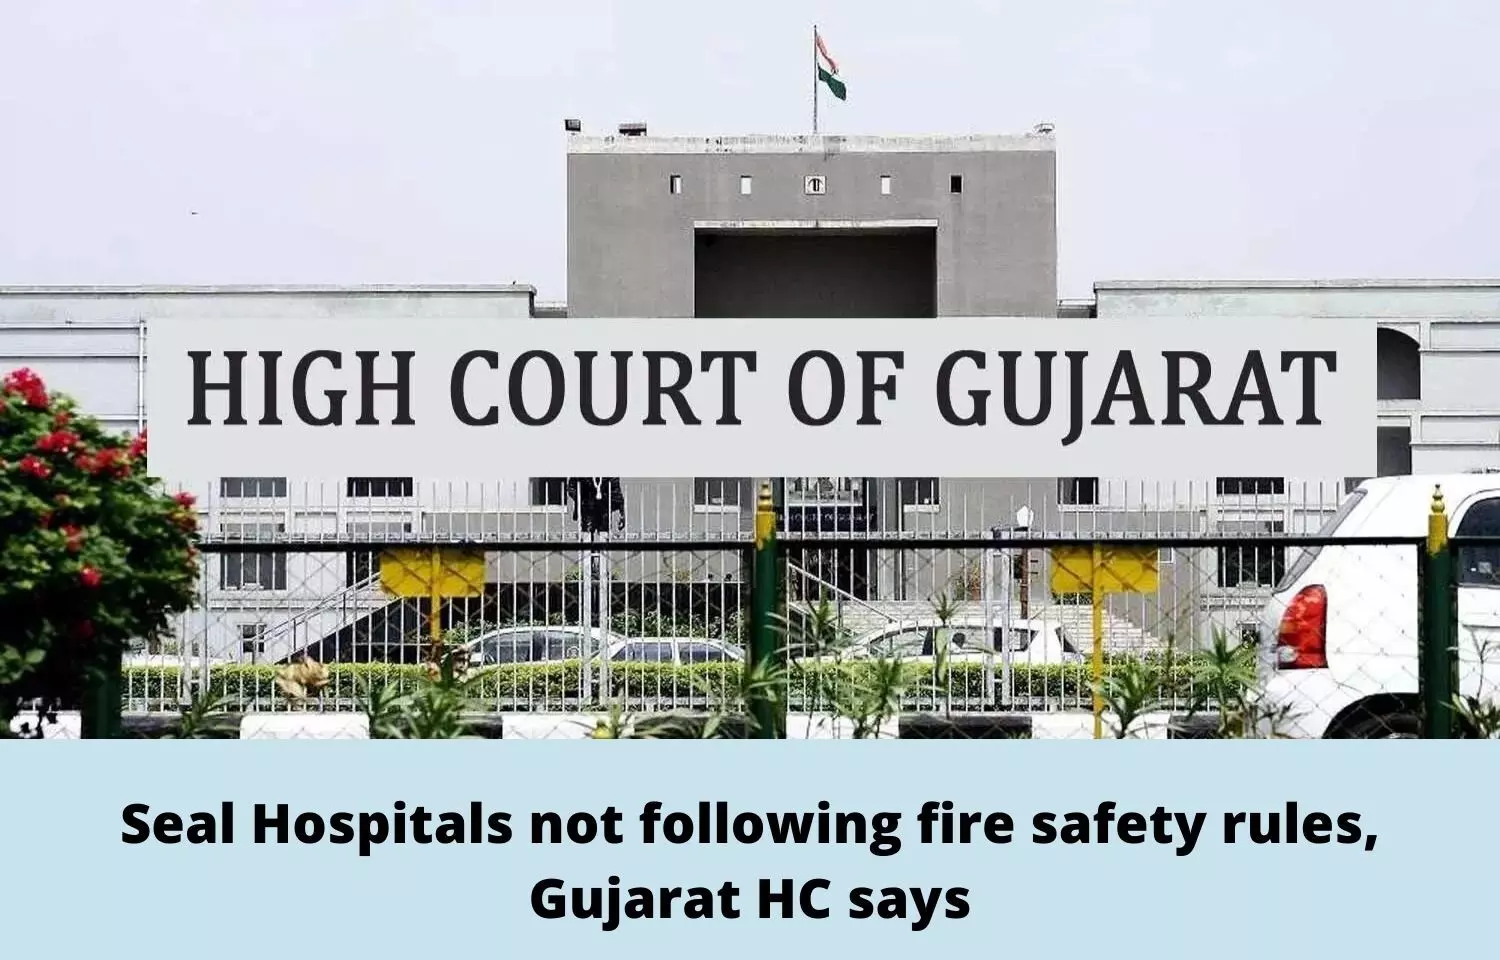 Seal Hospitals not following fire safety rules: Gujarat HC